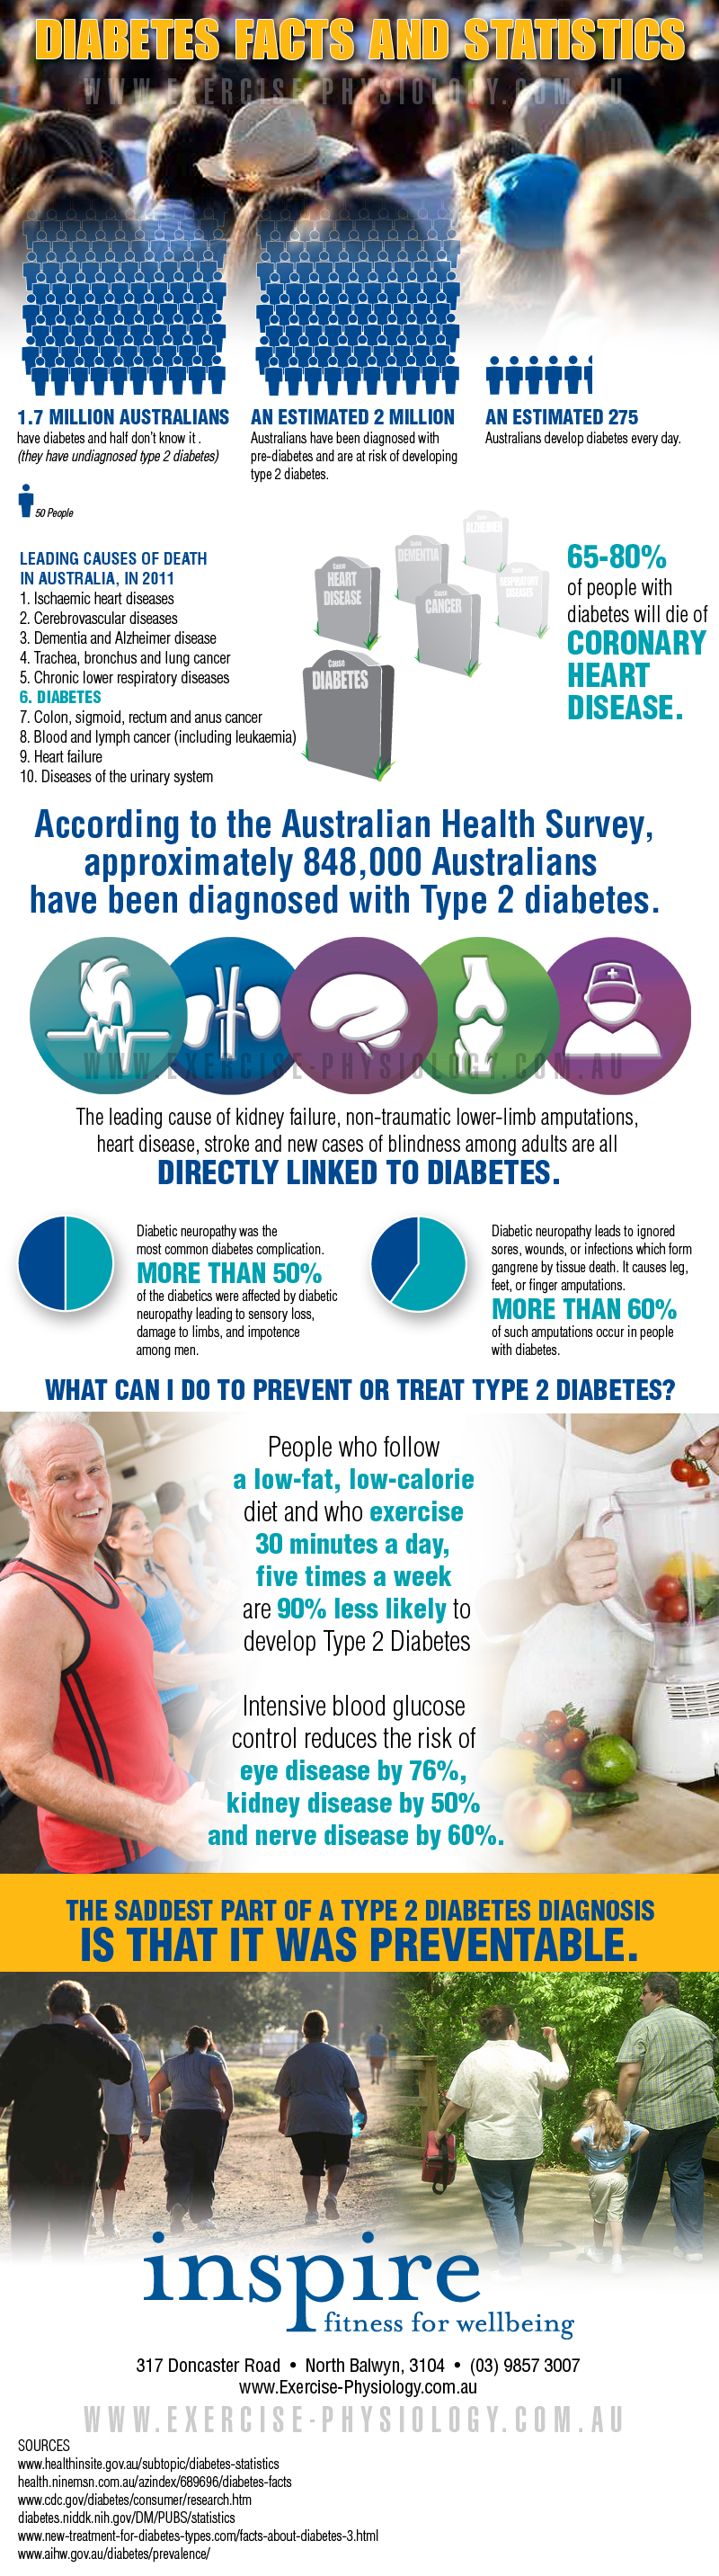 Diabetes Facts and Statistics - Infographic | Inspire Fitness for Wellbeing